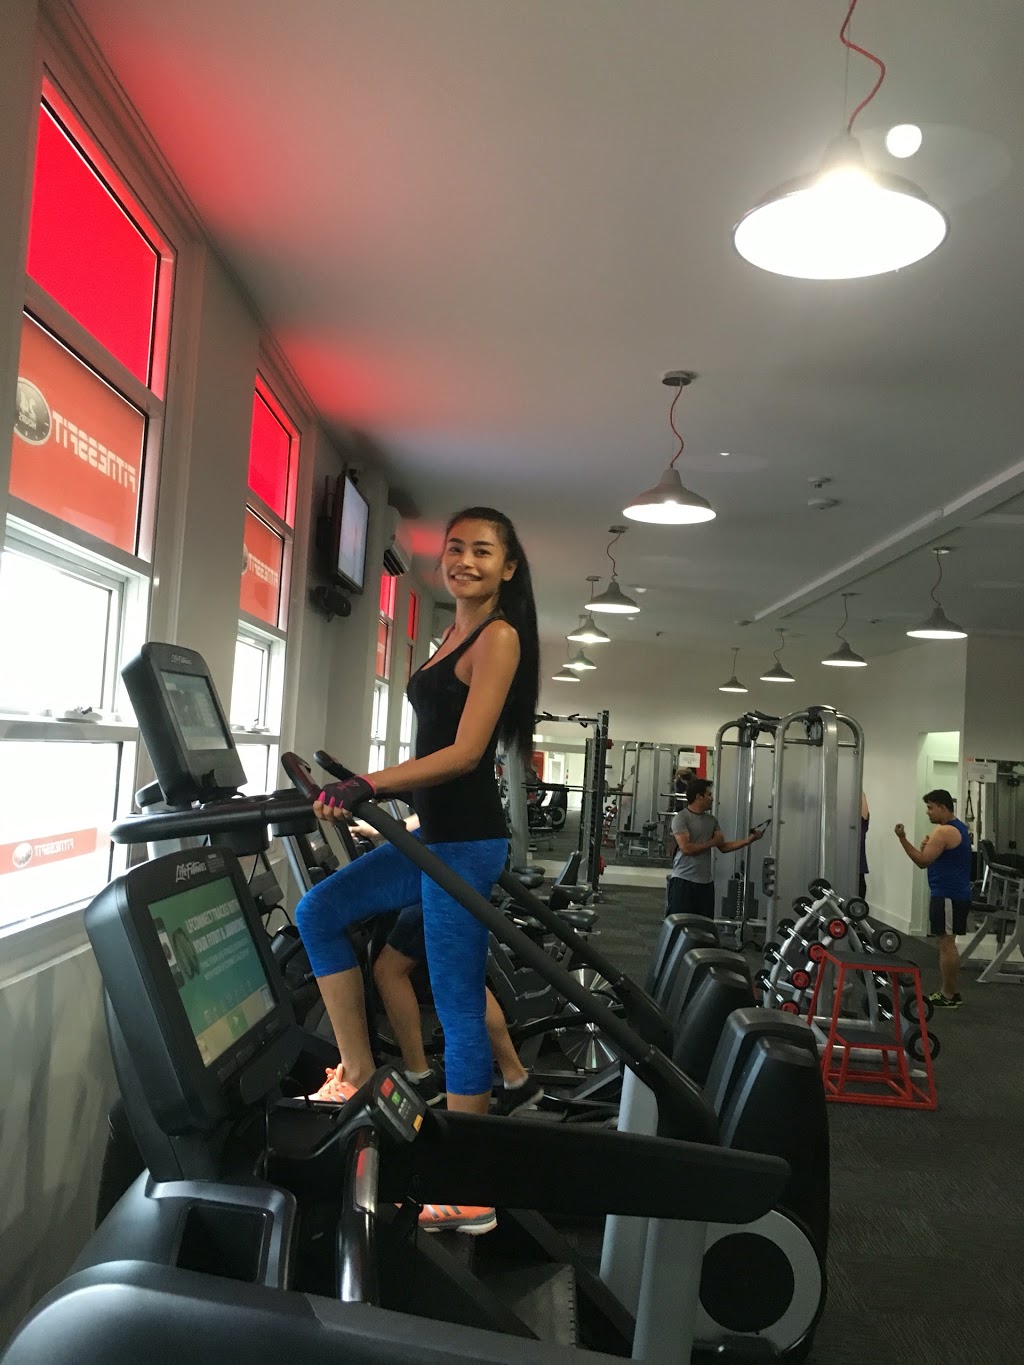 Fitness Fit 24 Hours | gym | 360 High St, Northcote VIC 3070, Australia | 0394868885 OR +61 3 9486 8885